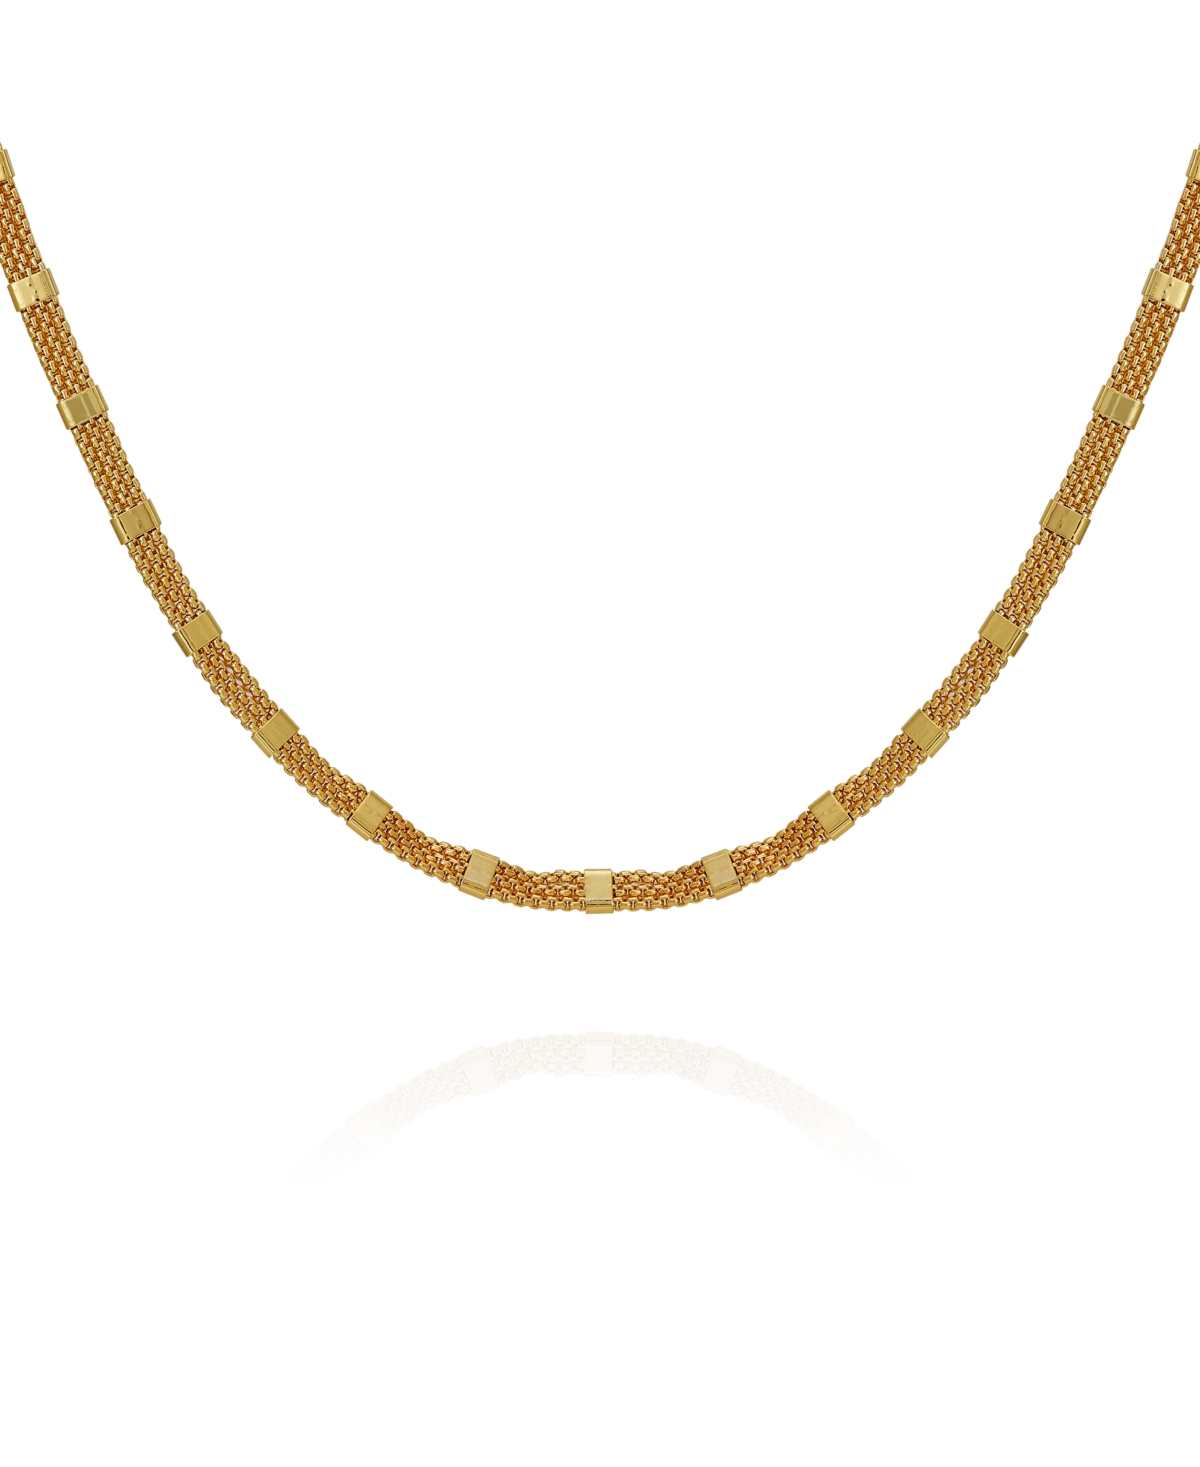 Vince Camuto Gold-tone Glass Stone Box Chain Necklace, 18" + 2" Extender